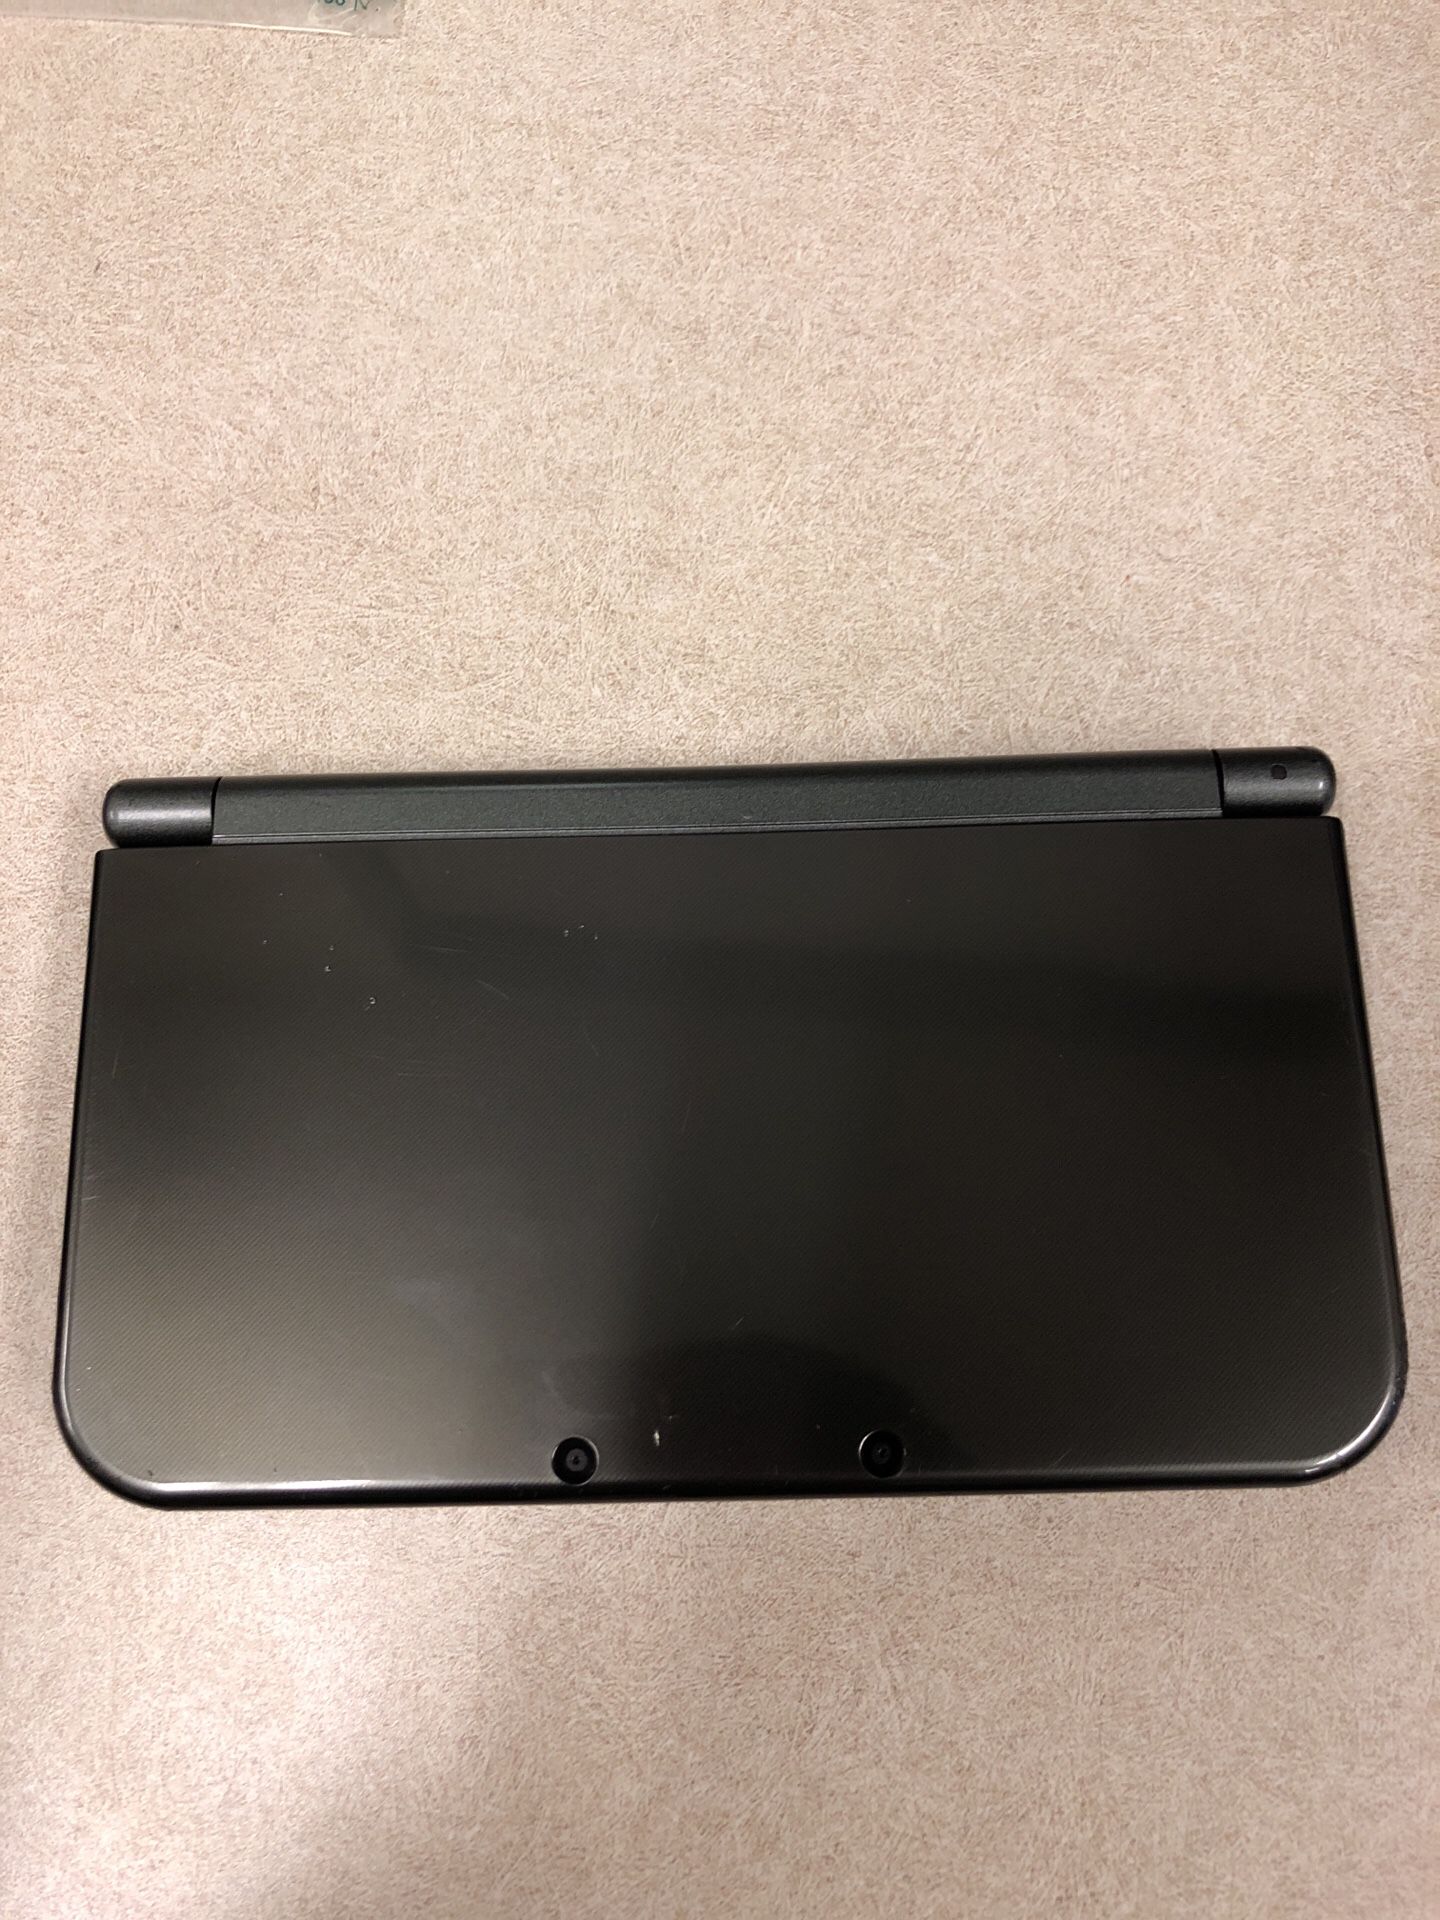 Nintendo 3ds XL with 4 games!